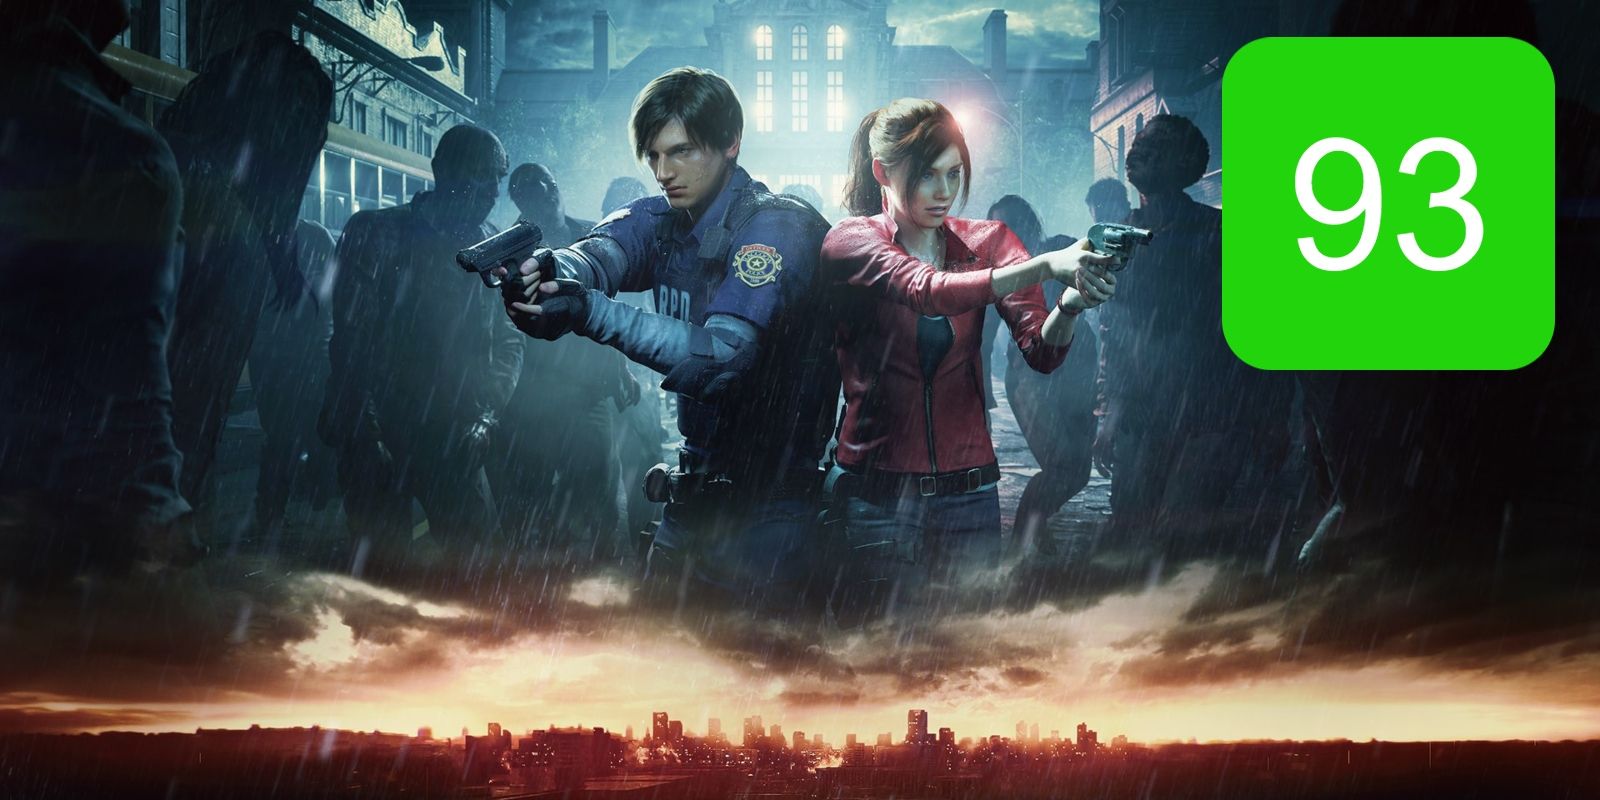 The xbox one metascore for resident evil 2, featuring leon and claire facing